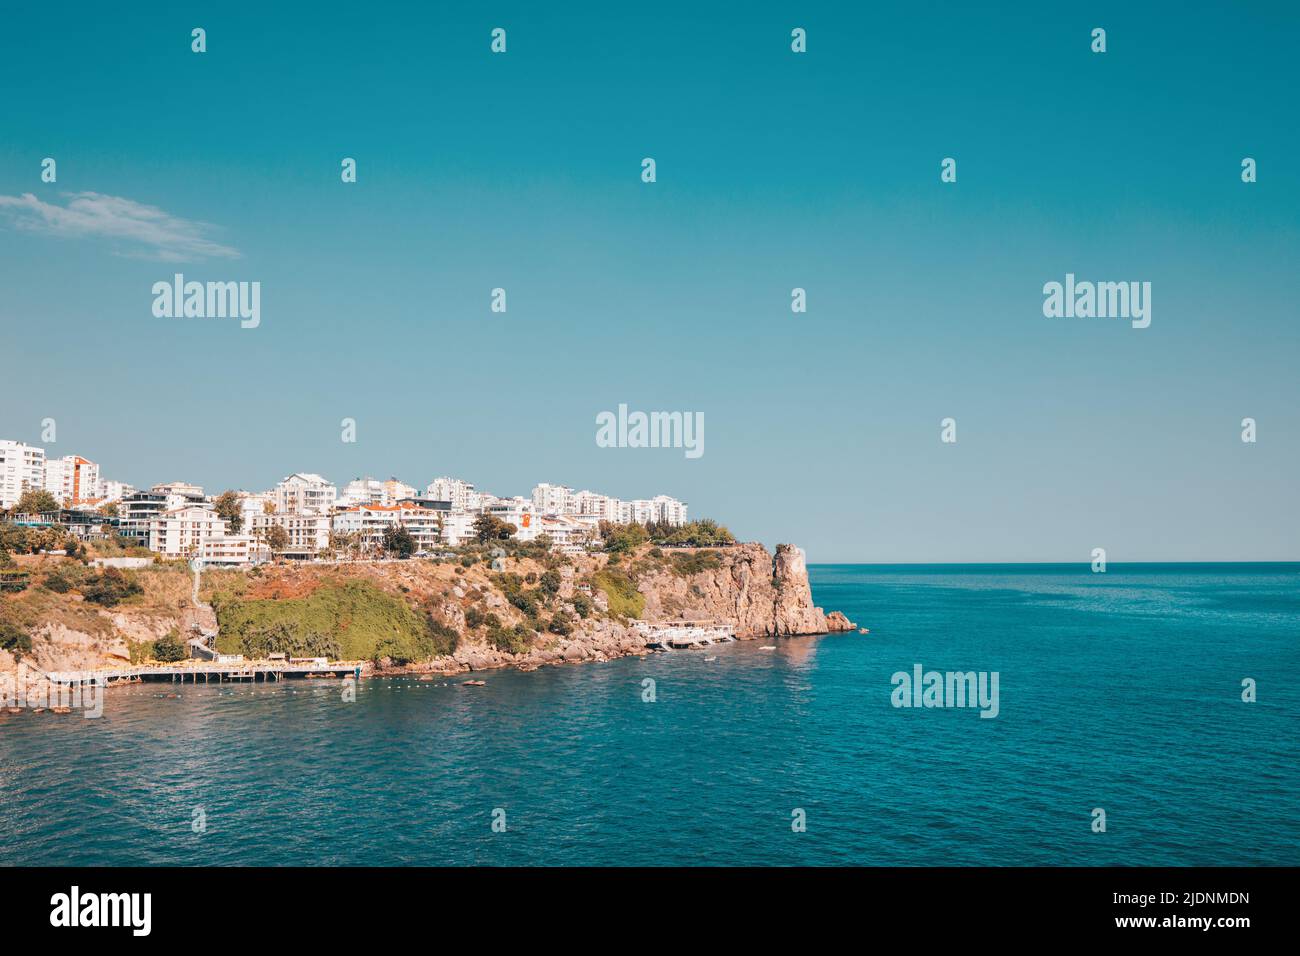 Lara district of a resort town of Antalya, Turkey situated on a high cliff. Vacation and coastline concept Stock Photo